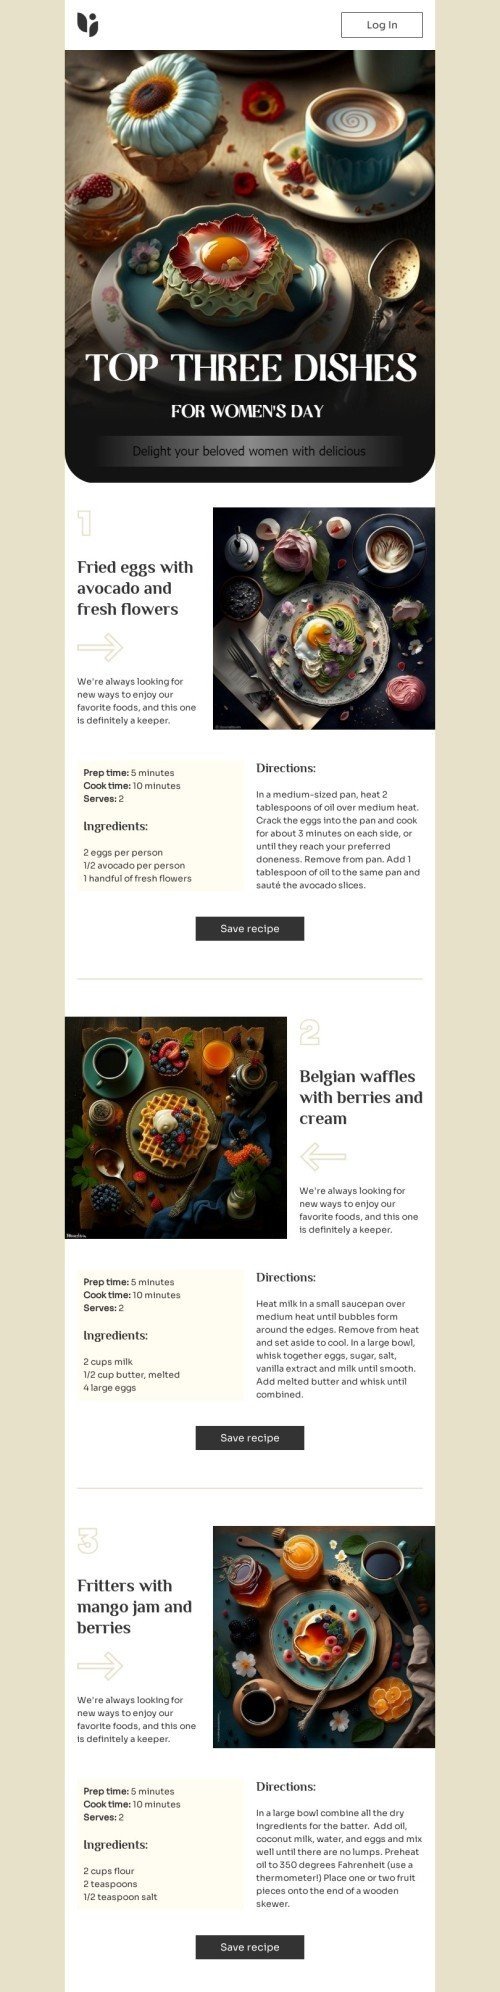 Women's Day email template "Food recipes by artificial intelligence" for publications & blogging industry desktop view